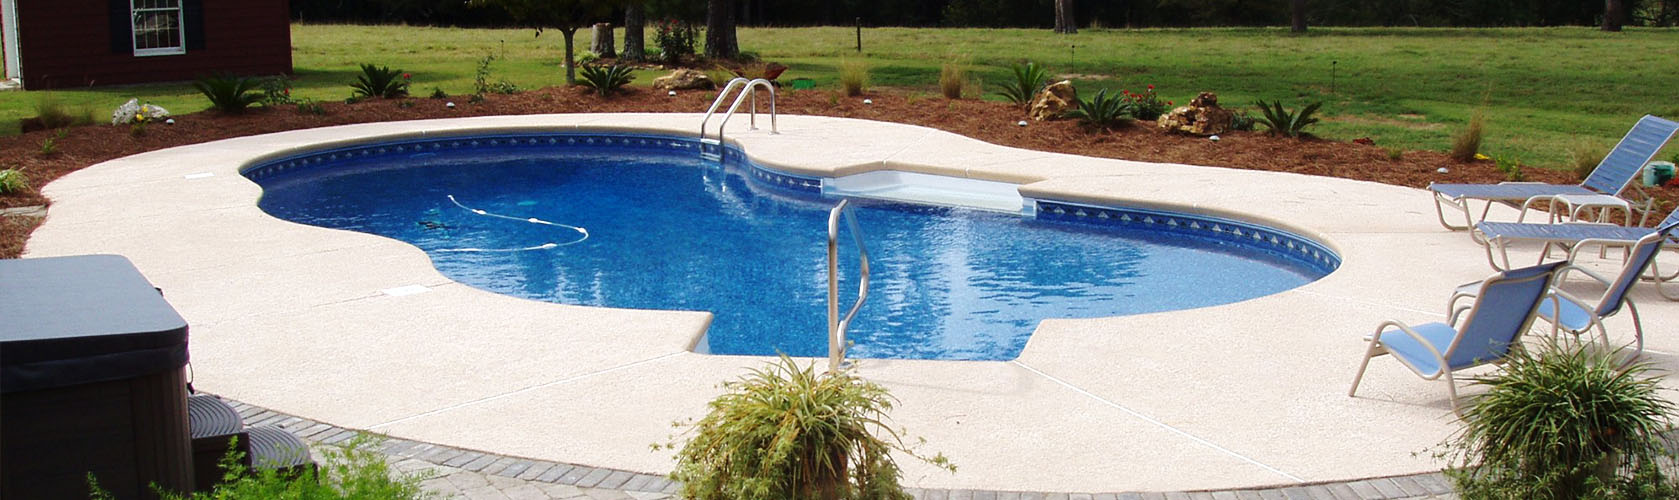 A newly installed in-ground pool with a garden.